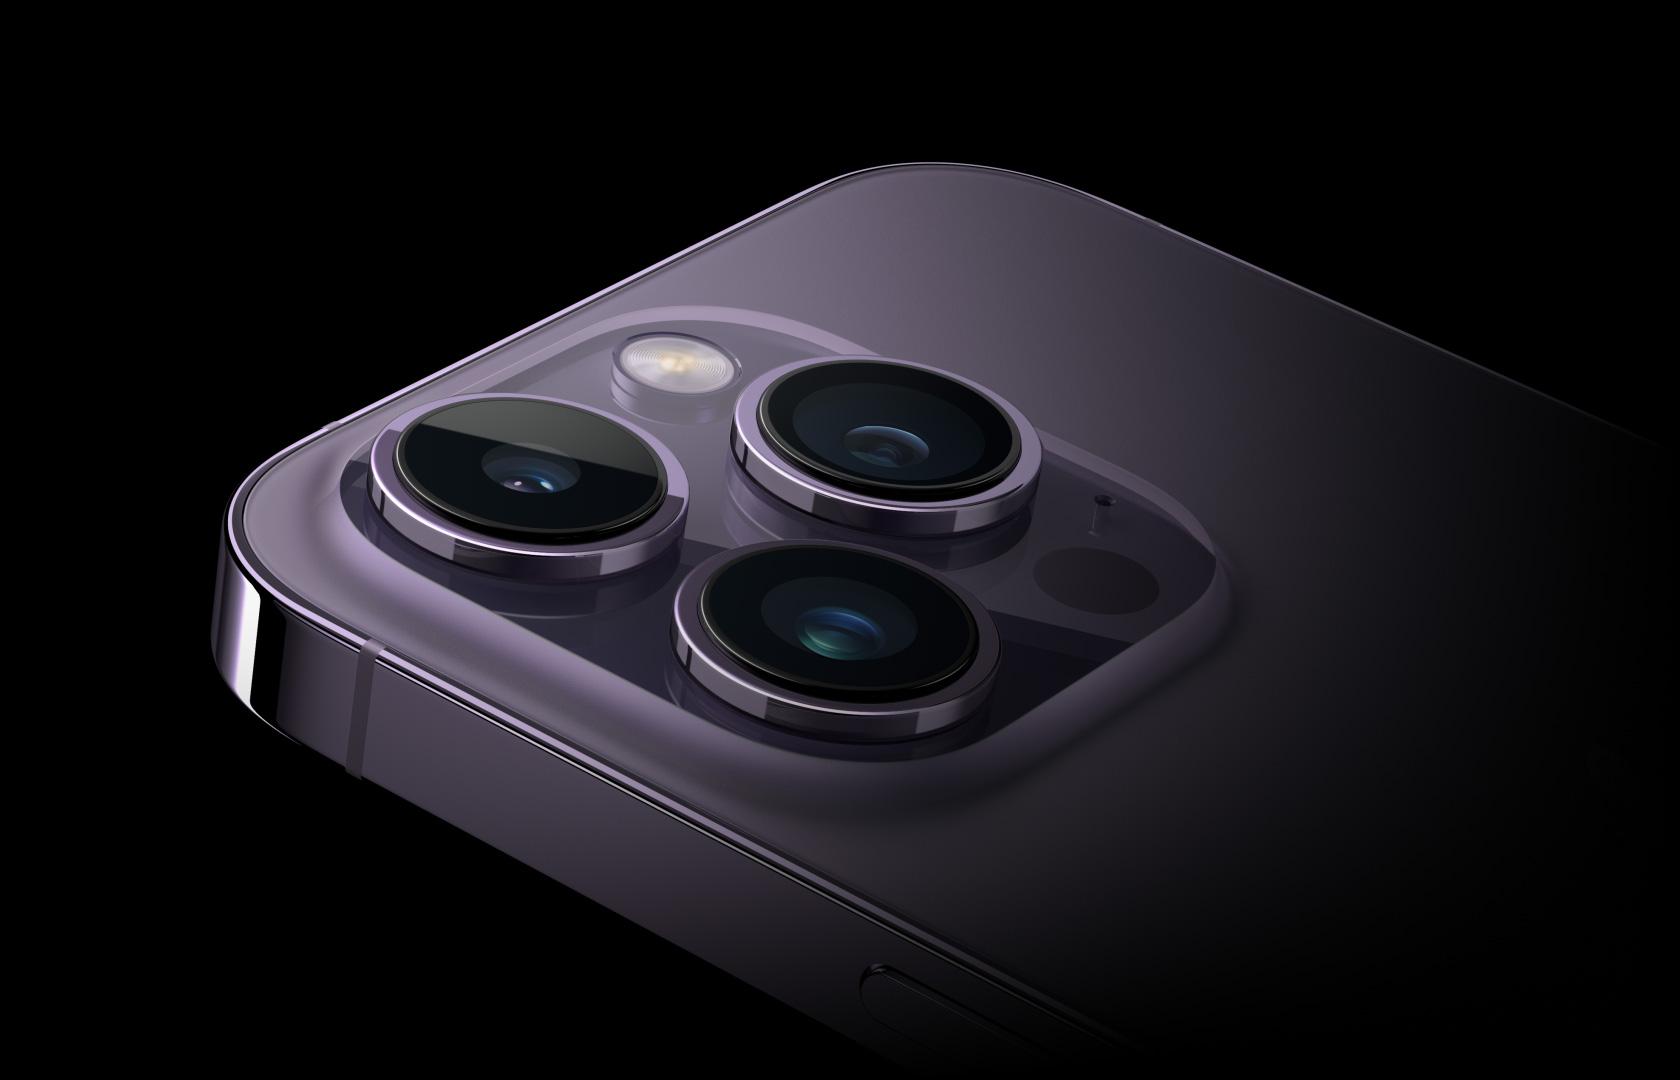 A16 Bionic chip and Sony photo sensors increased the production cost of the iPhone 14 Pro.